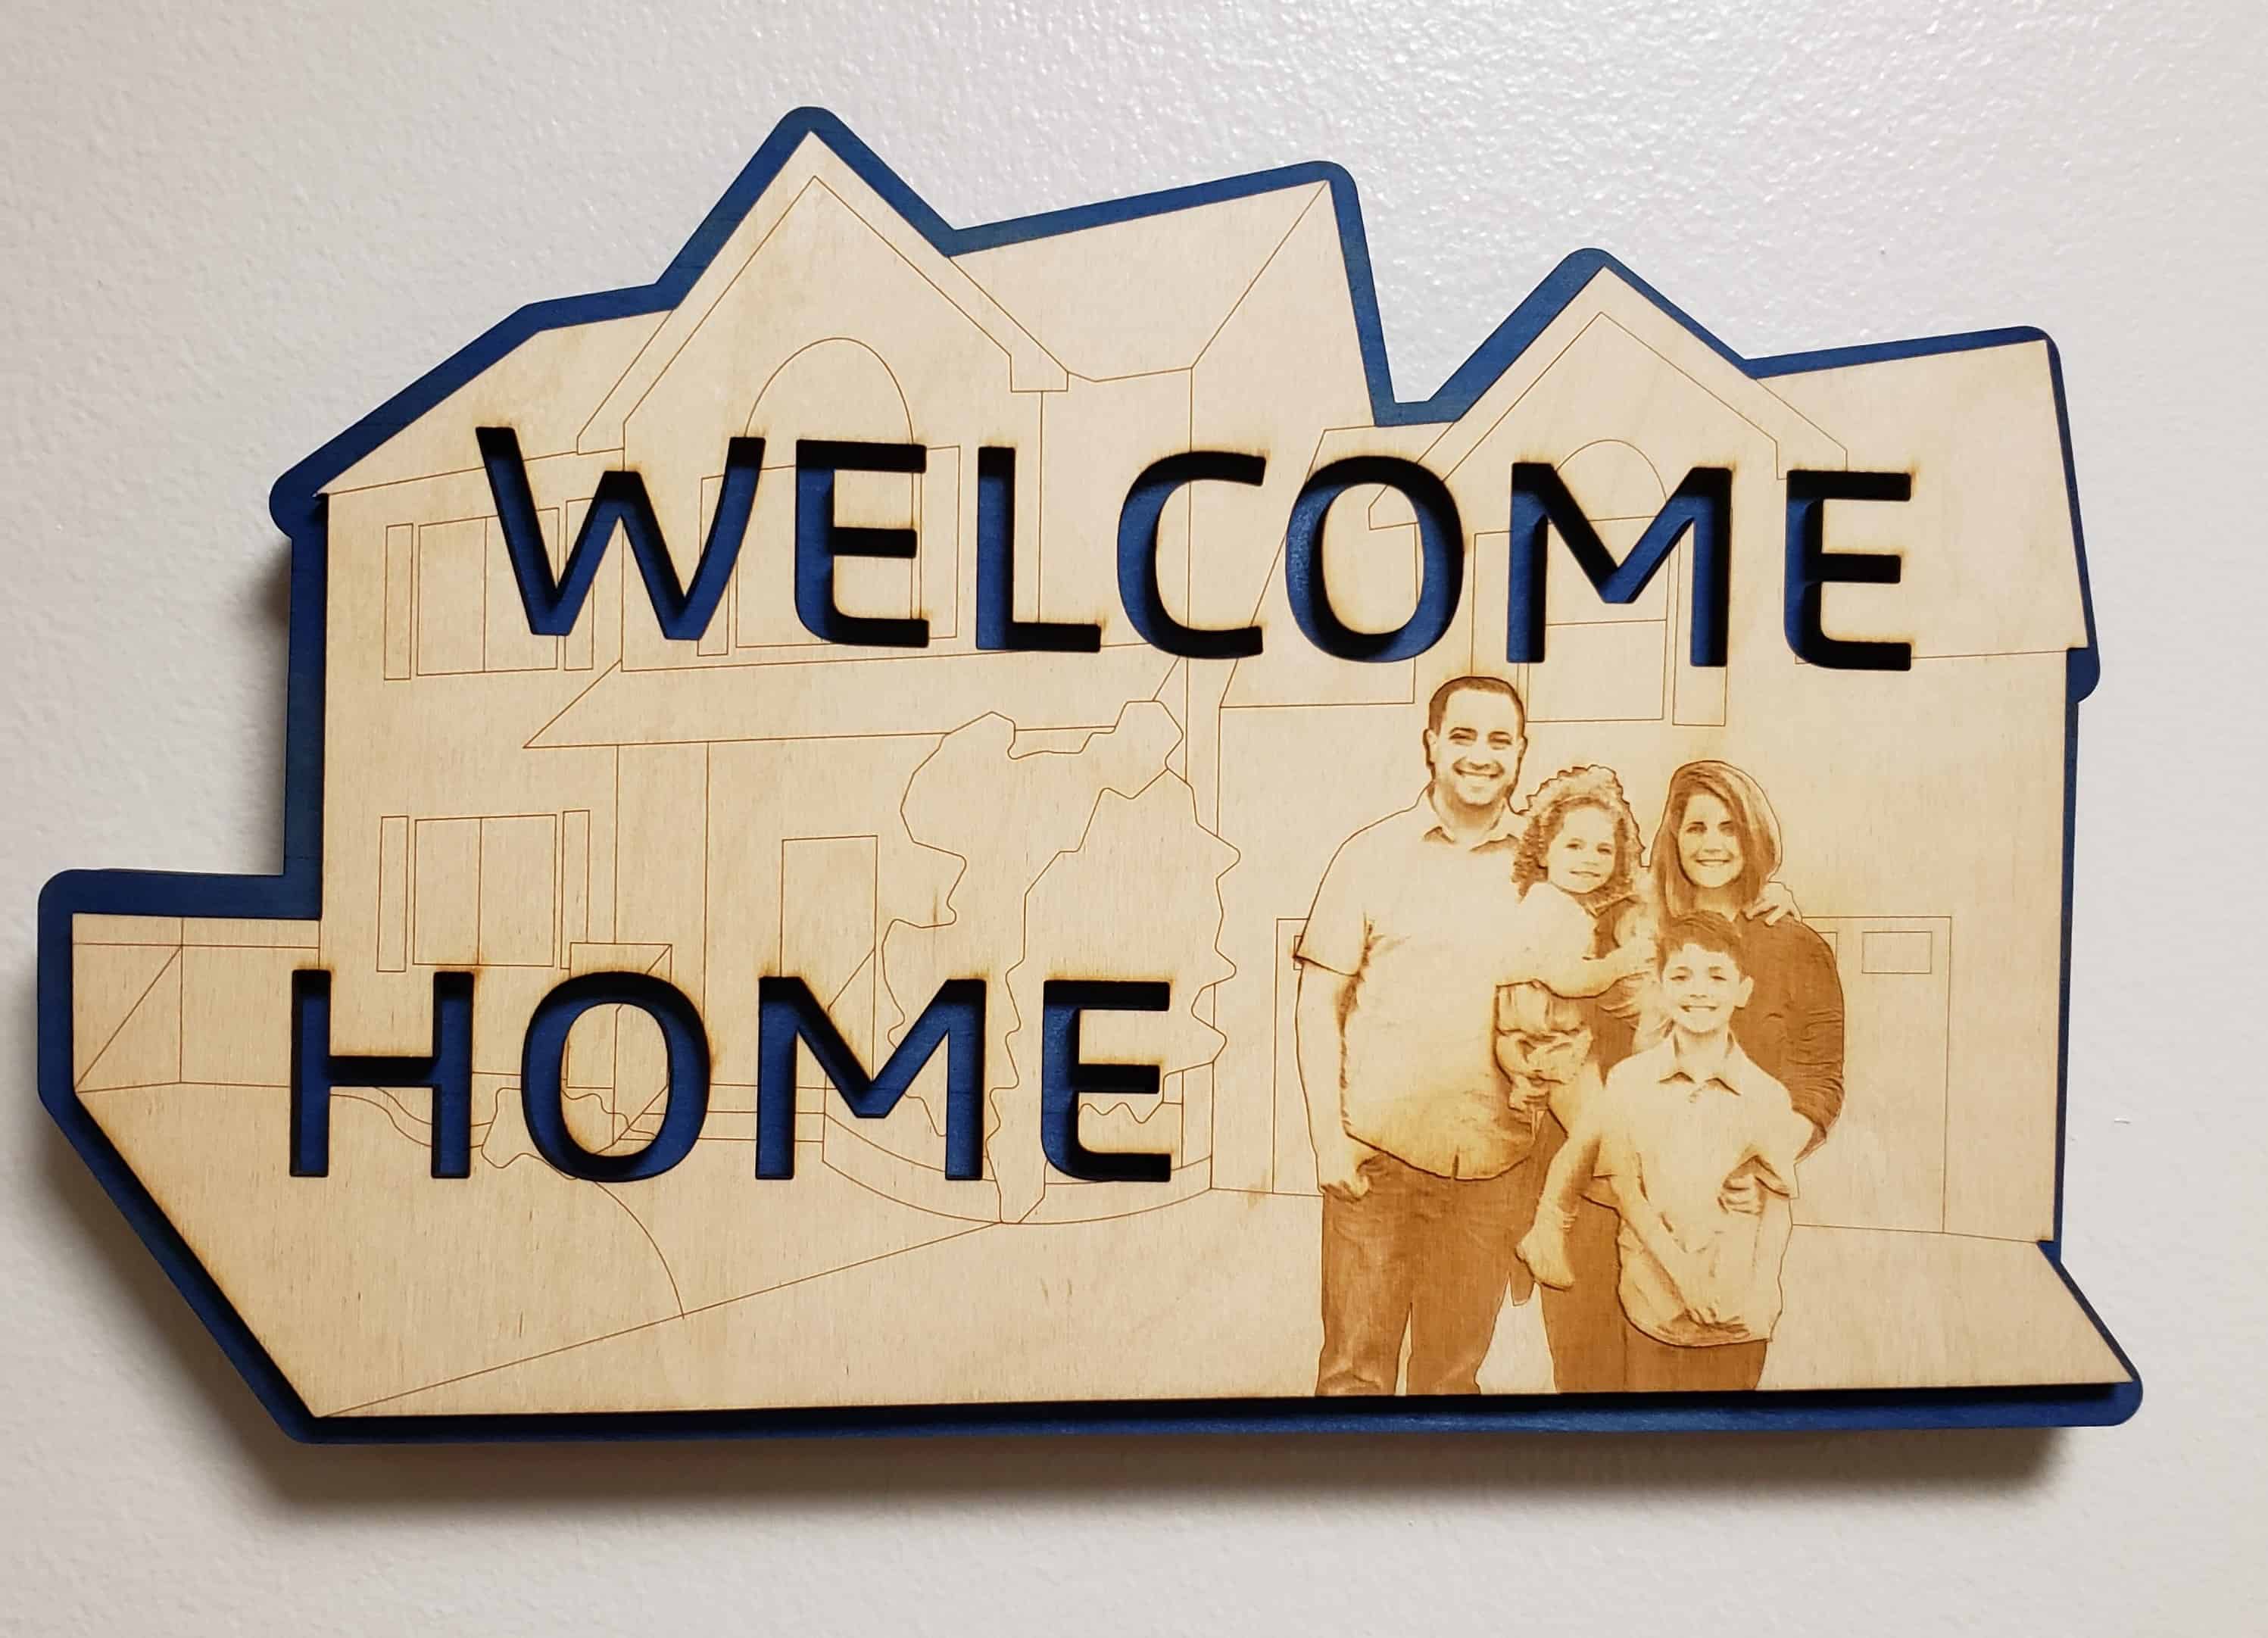 Blue Welcome Home Plaque on Wall